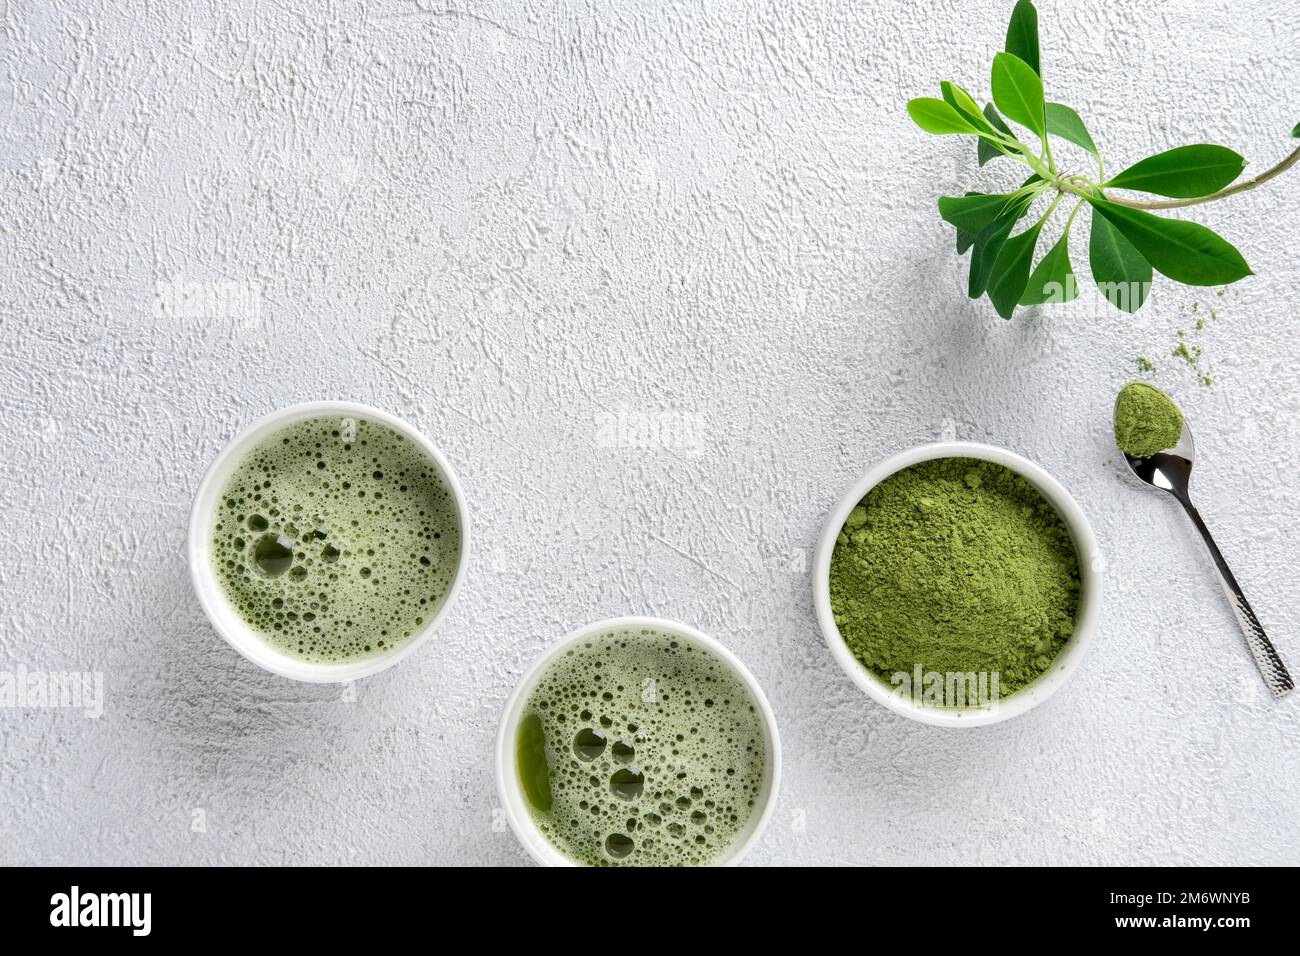 Matcha tea powder on gray concrete background. Tea ceremony. Healthy drink. Traditional japanese drink. Stock Photo